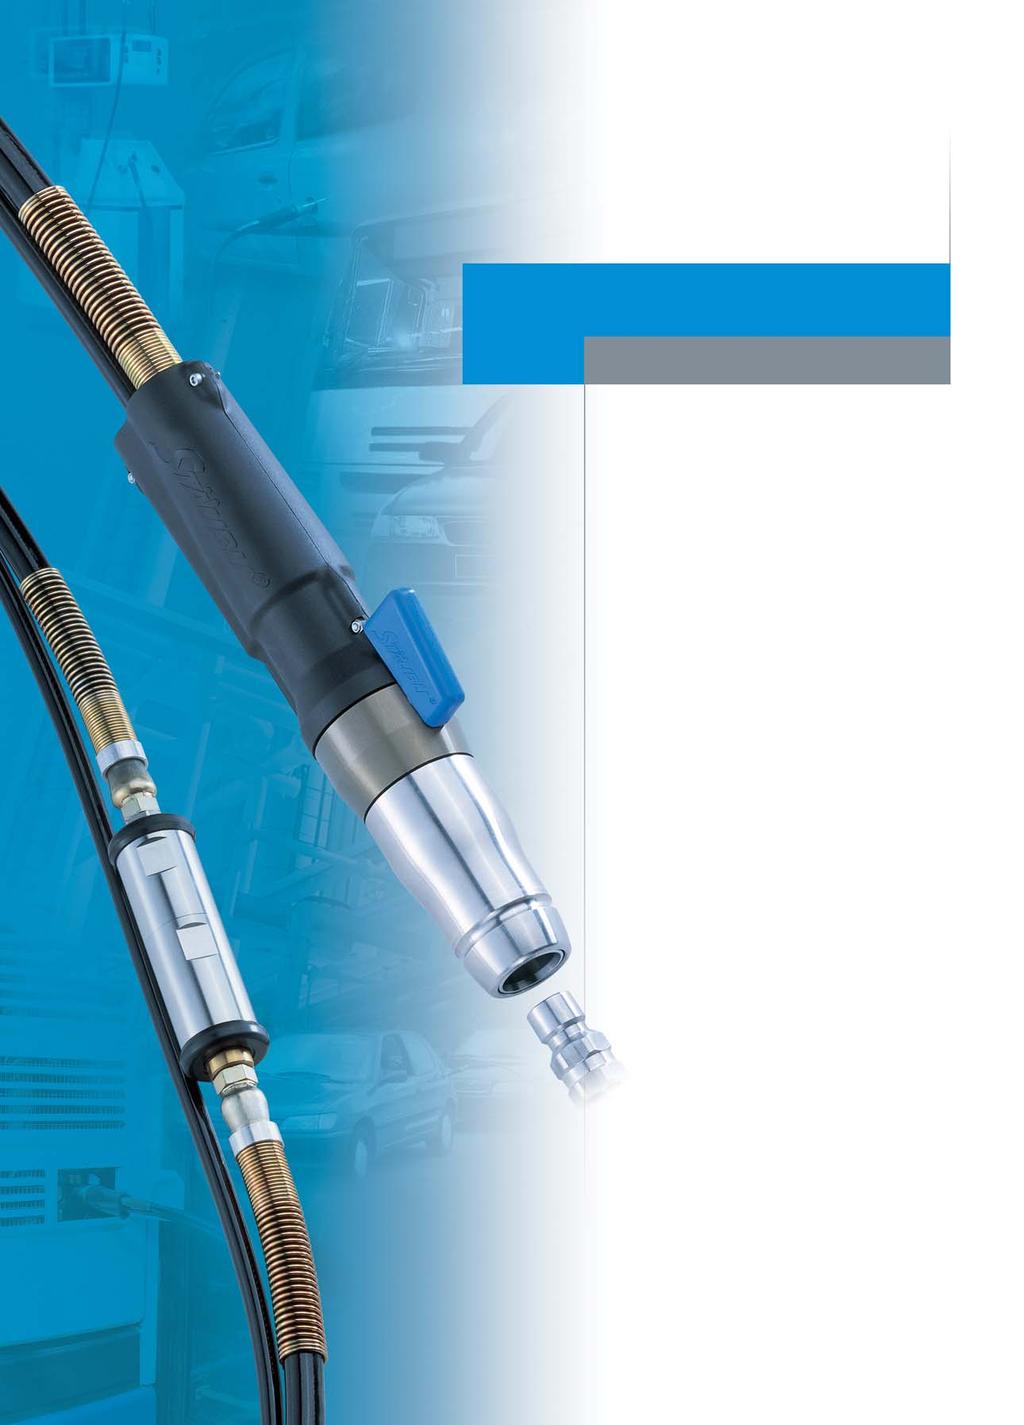 CONNECTORS THE CONNECTION SOLUTION NGV REFUELLING CONNECTIONS REFUELLING Comprehensive range of NGV 1 compatible products for the refuelling of all kinds of Compressed Natural